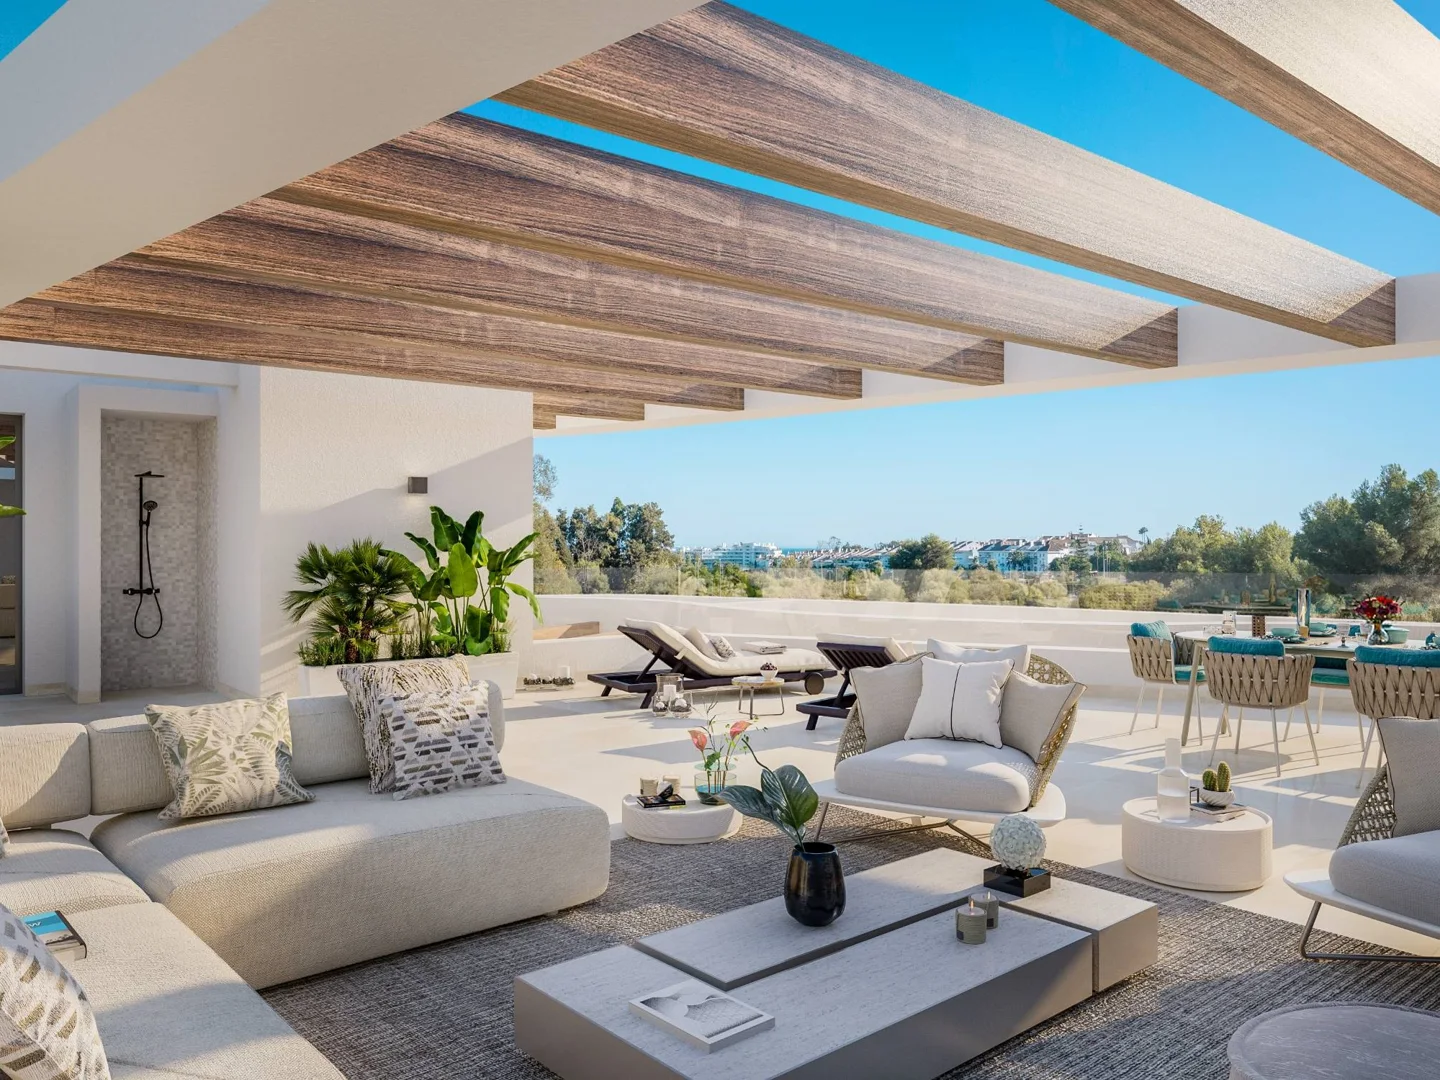 Guadalmina: Stylish luxurious apartment project in a great location